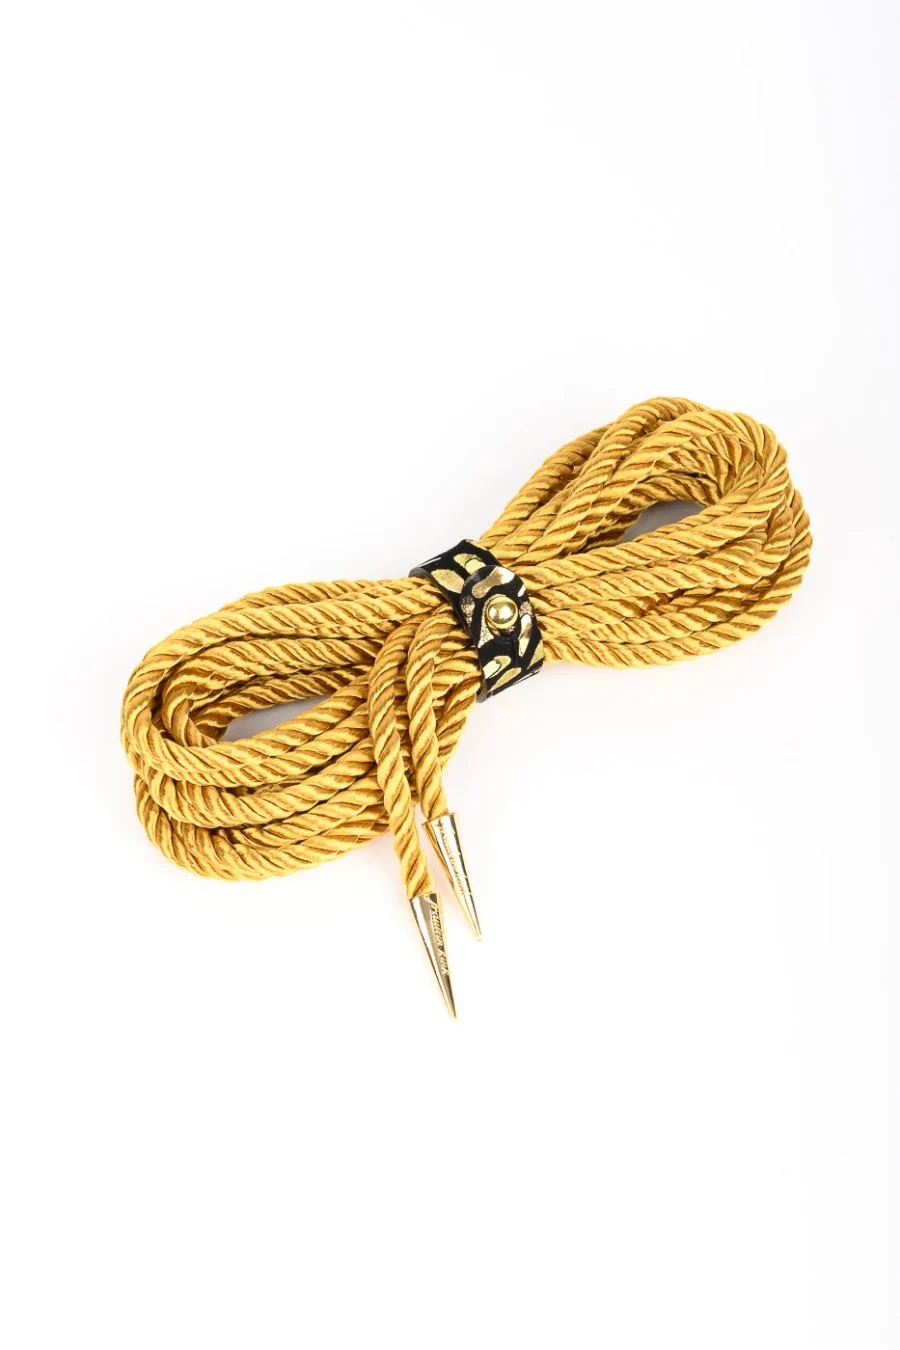 Fraulein Kink Deluxe Bondage Rope With Spikes 2